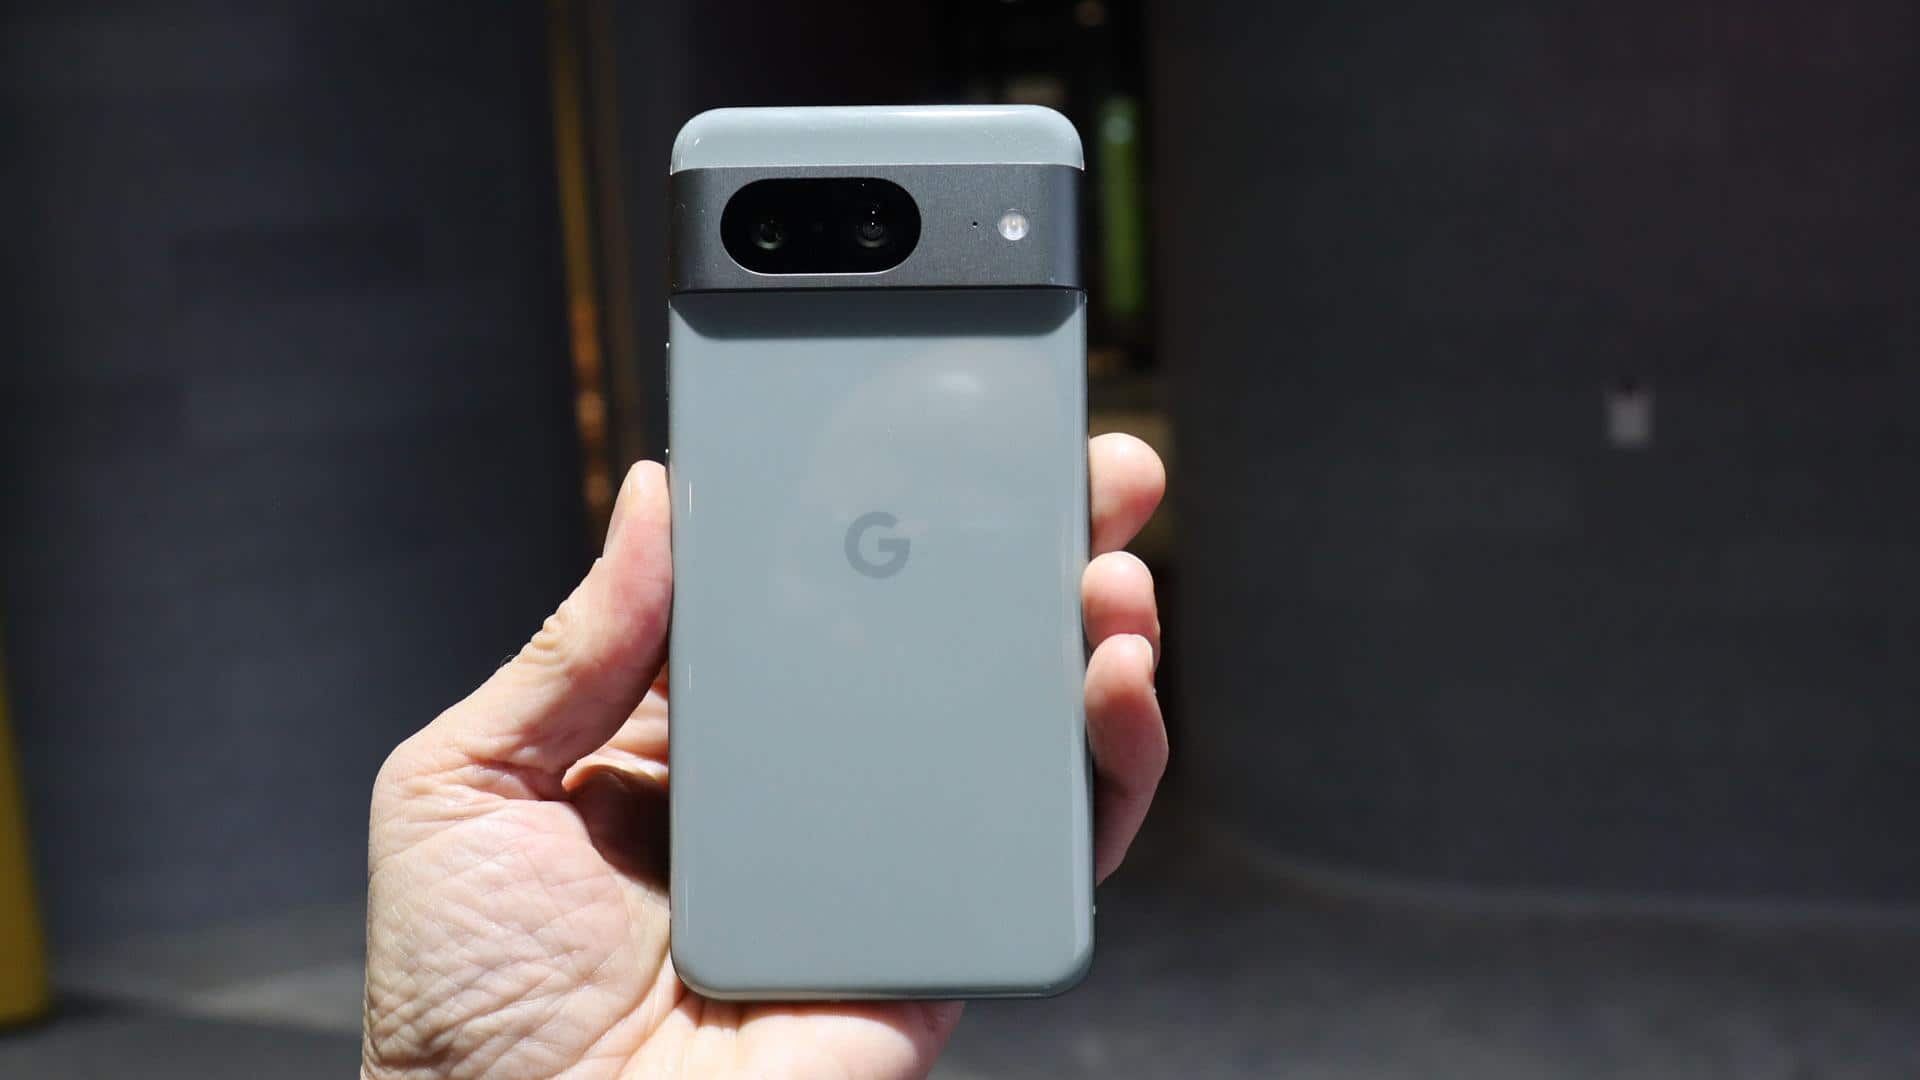 Google's 'Adaptive Thermal' feature to help with Pixel's overheating issues